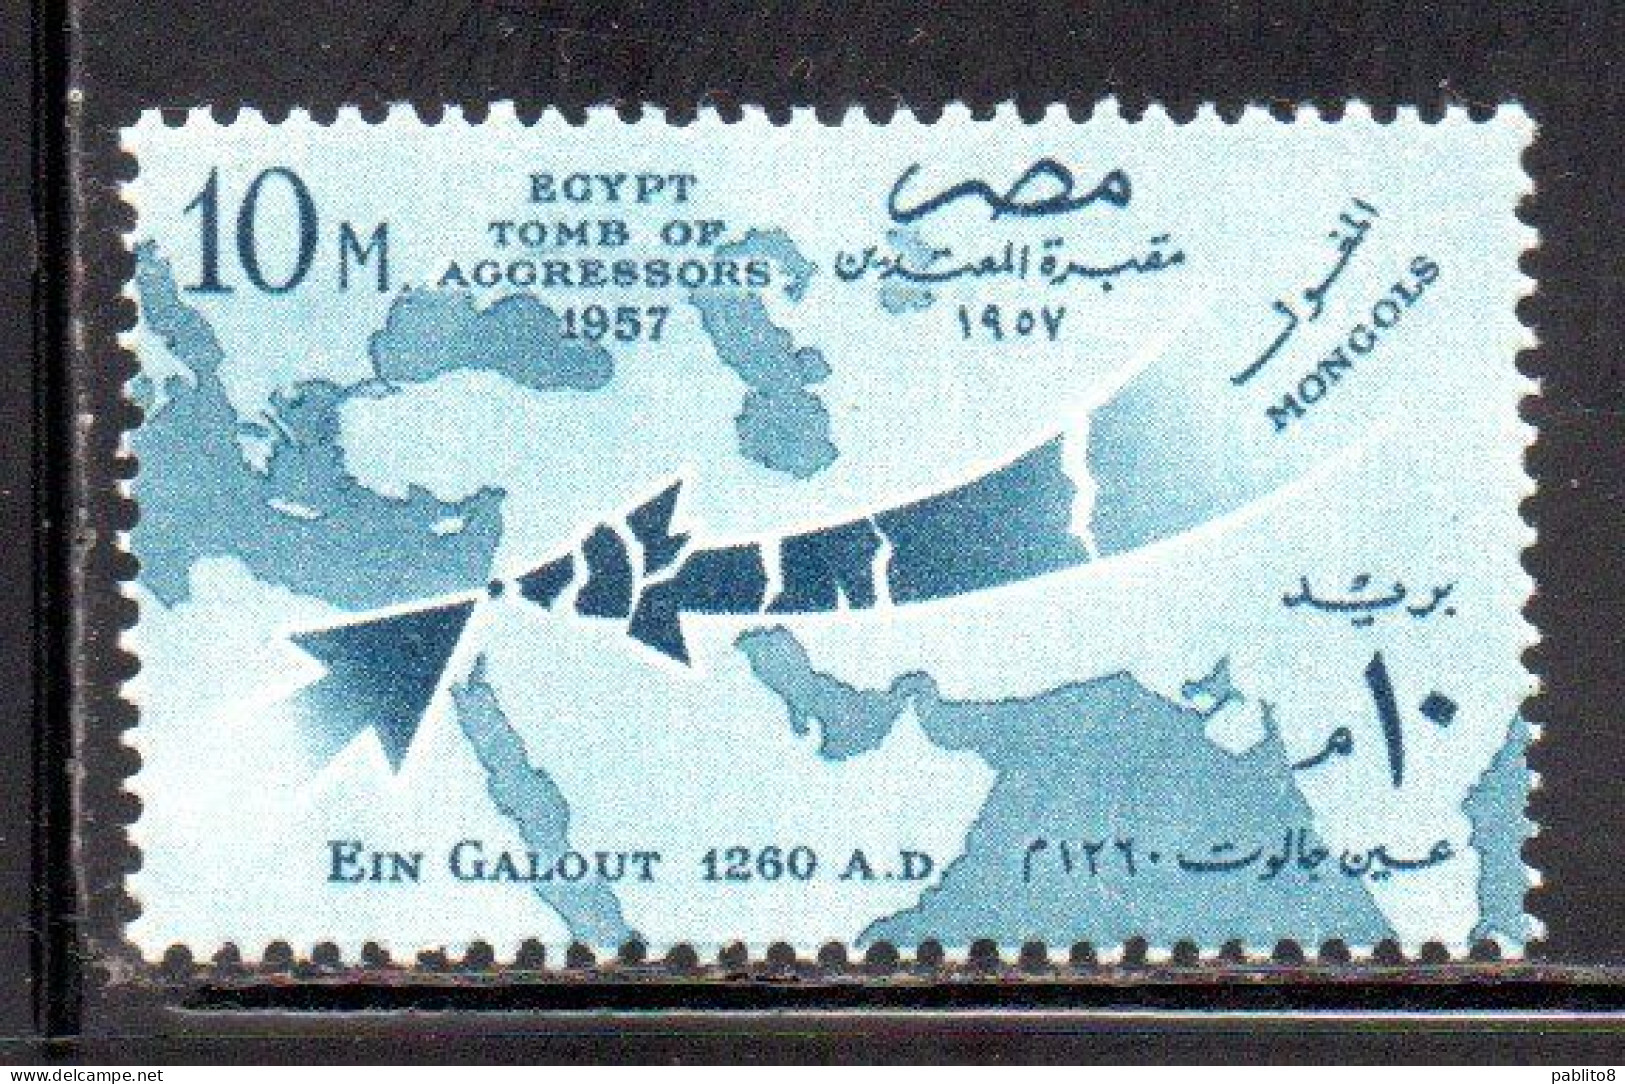 UAR EGYPT EGITTO 1957 TOMB OF AGGRESSORS 1957 MAP OF MIDDLE EAST EIN GALOUT 1260 10m MH - Neufs